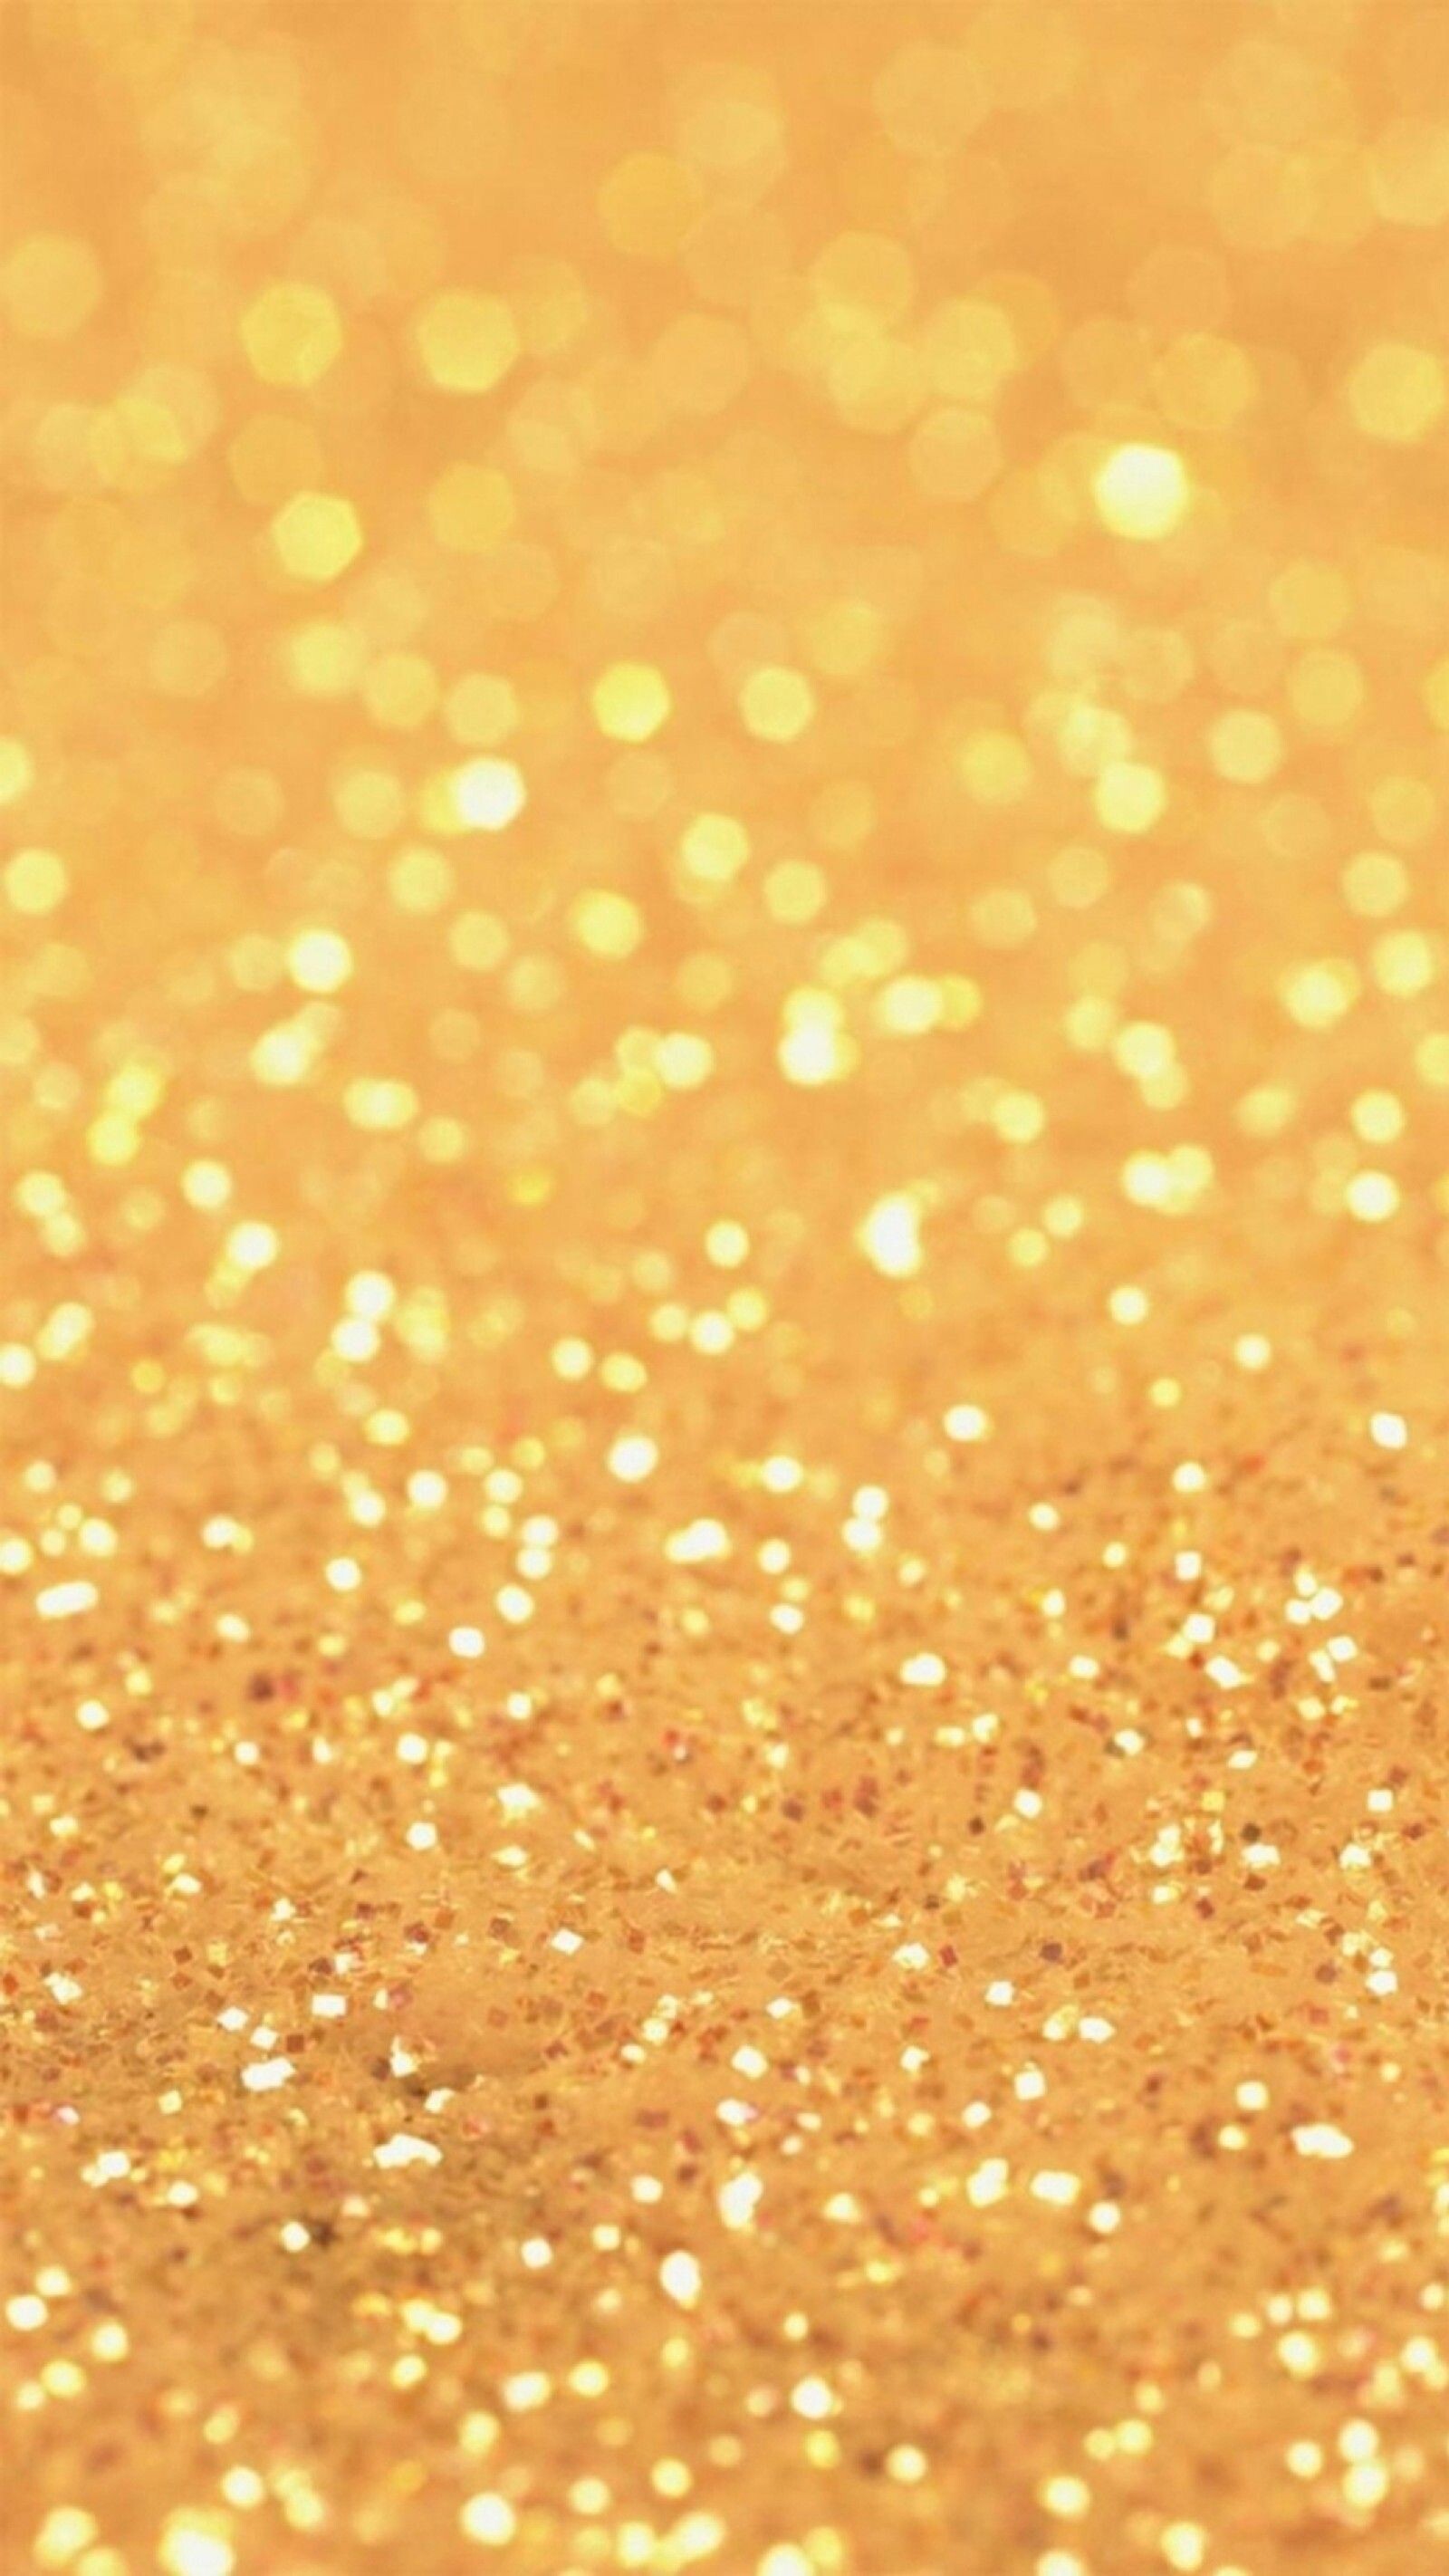 Gold Sparkle: Small particles with golden glittering surfaces, PVC cut into various shapes. 1600x2850 HD Background.